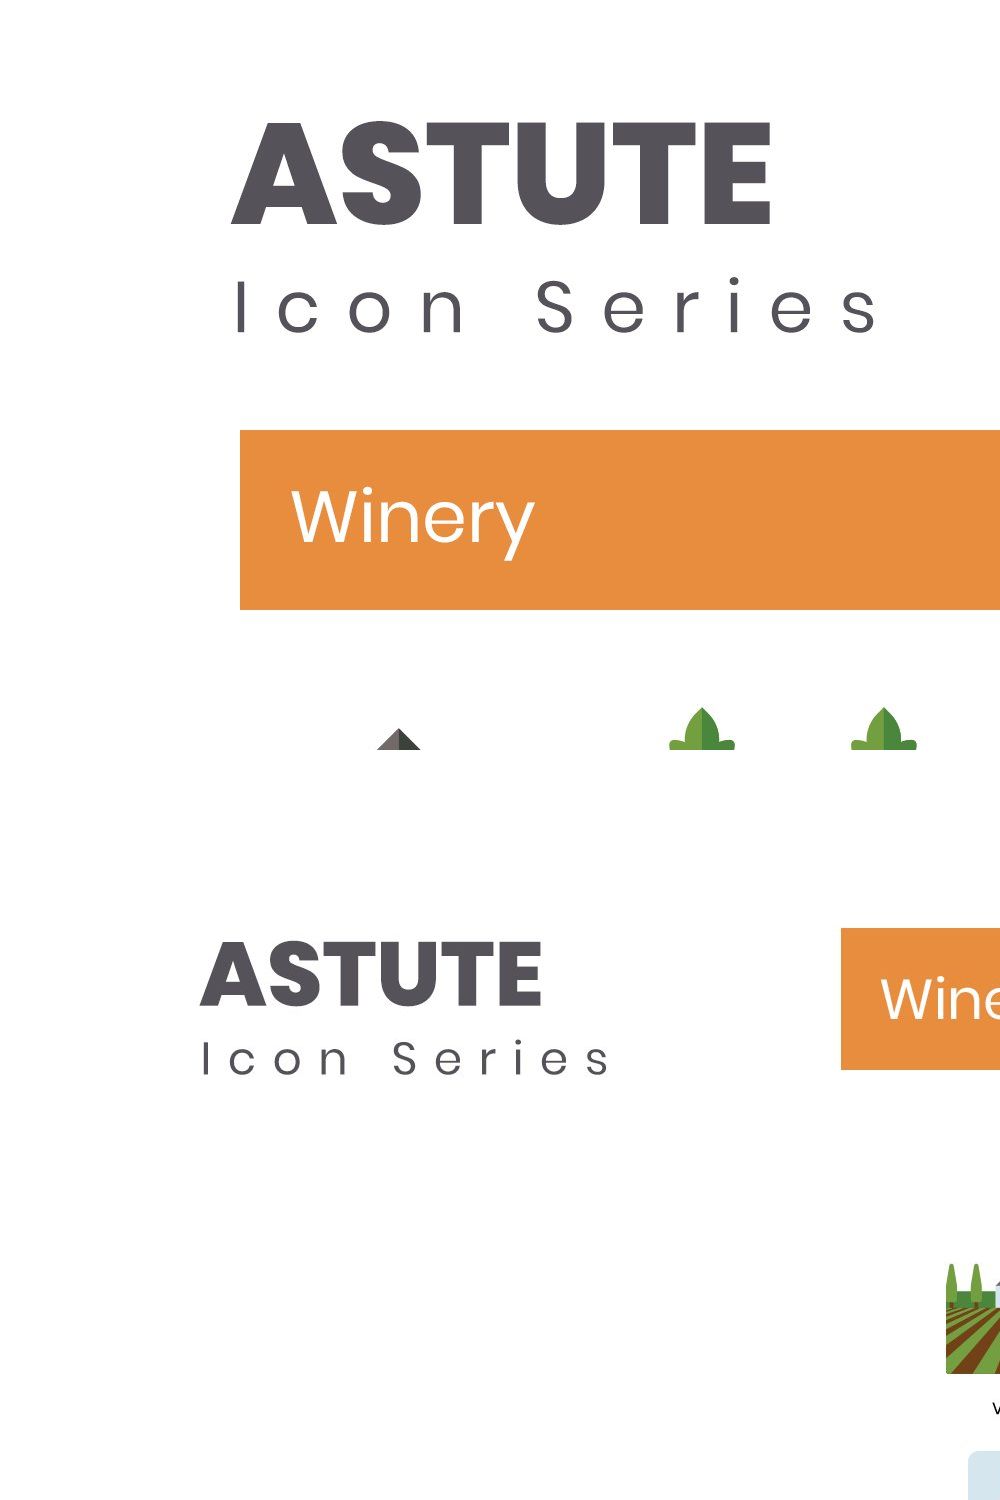 80 Winery Icons - Astute Series pinterest preview image.